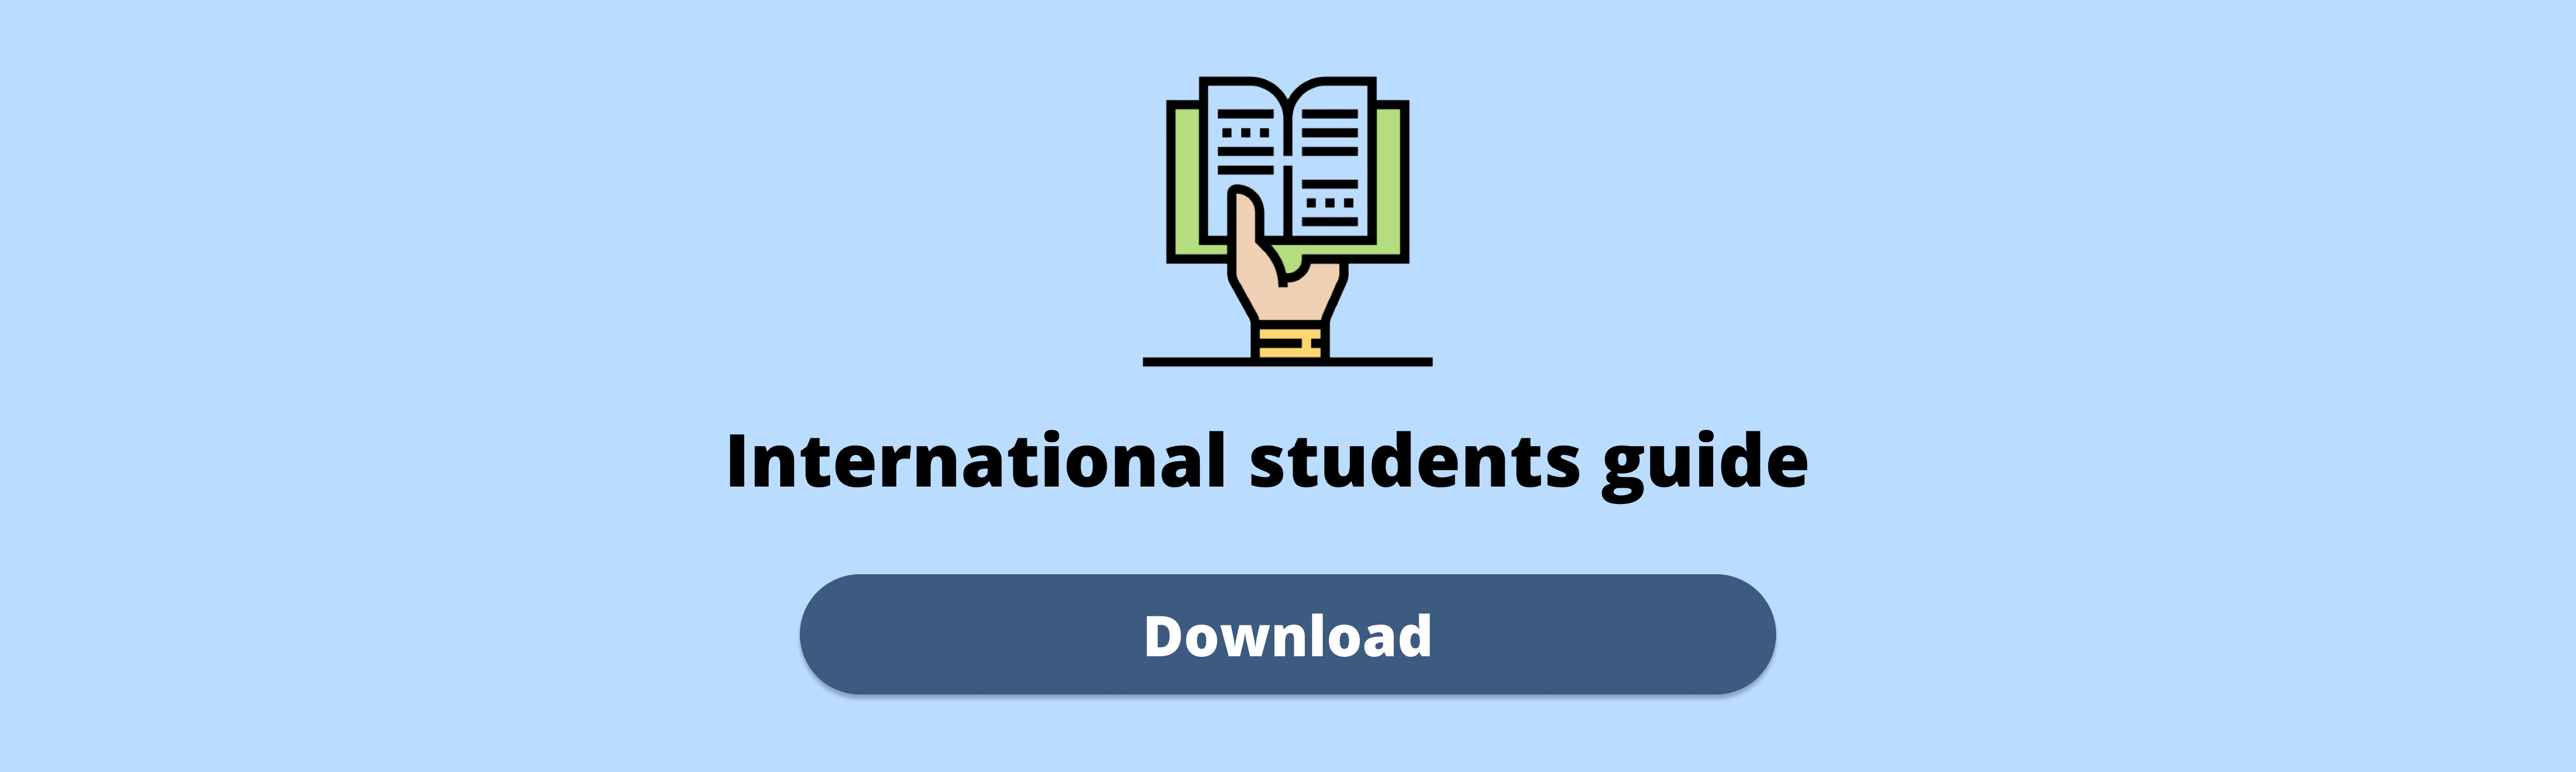 International students guide